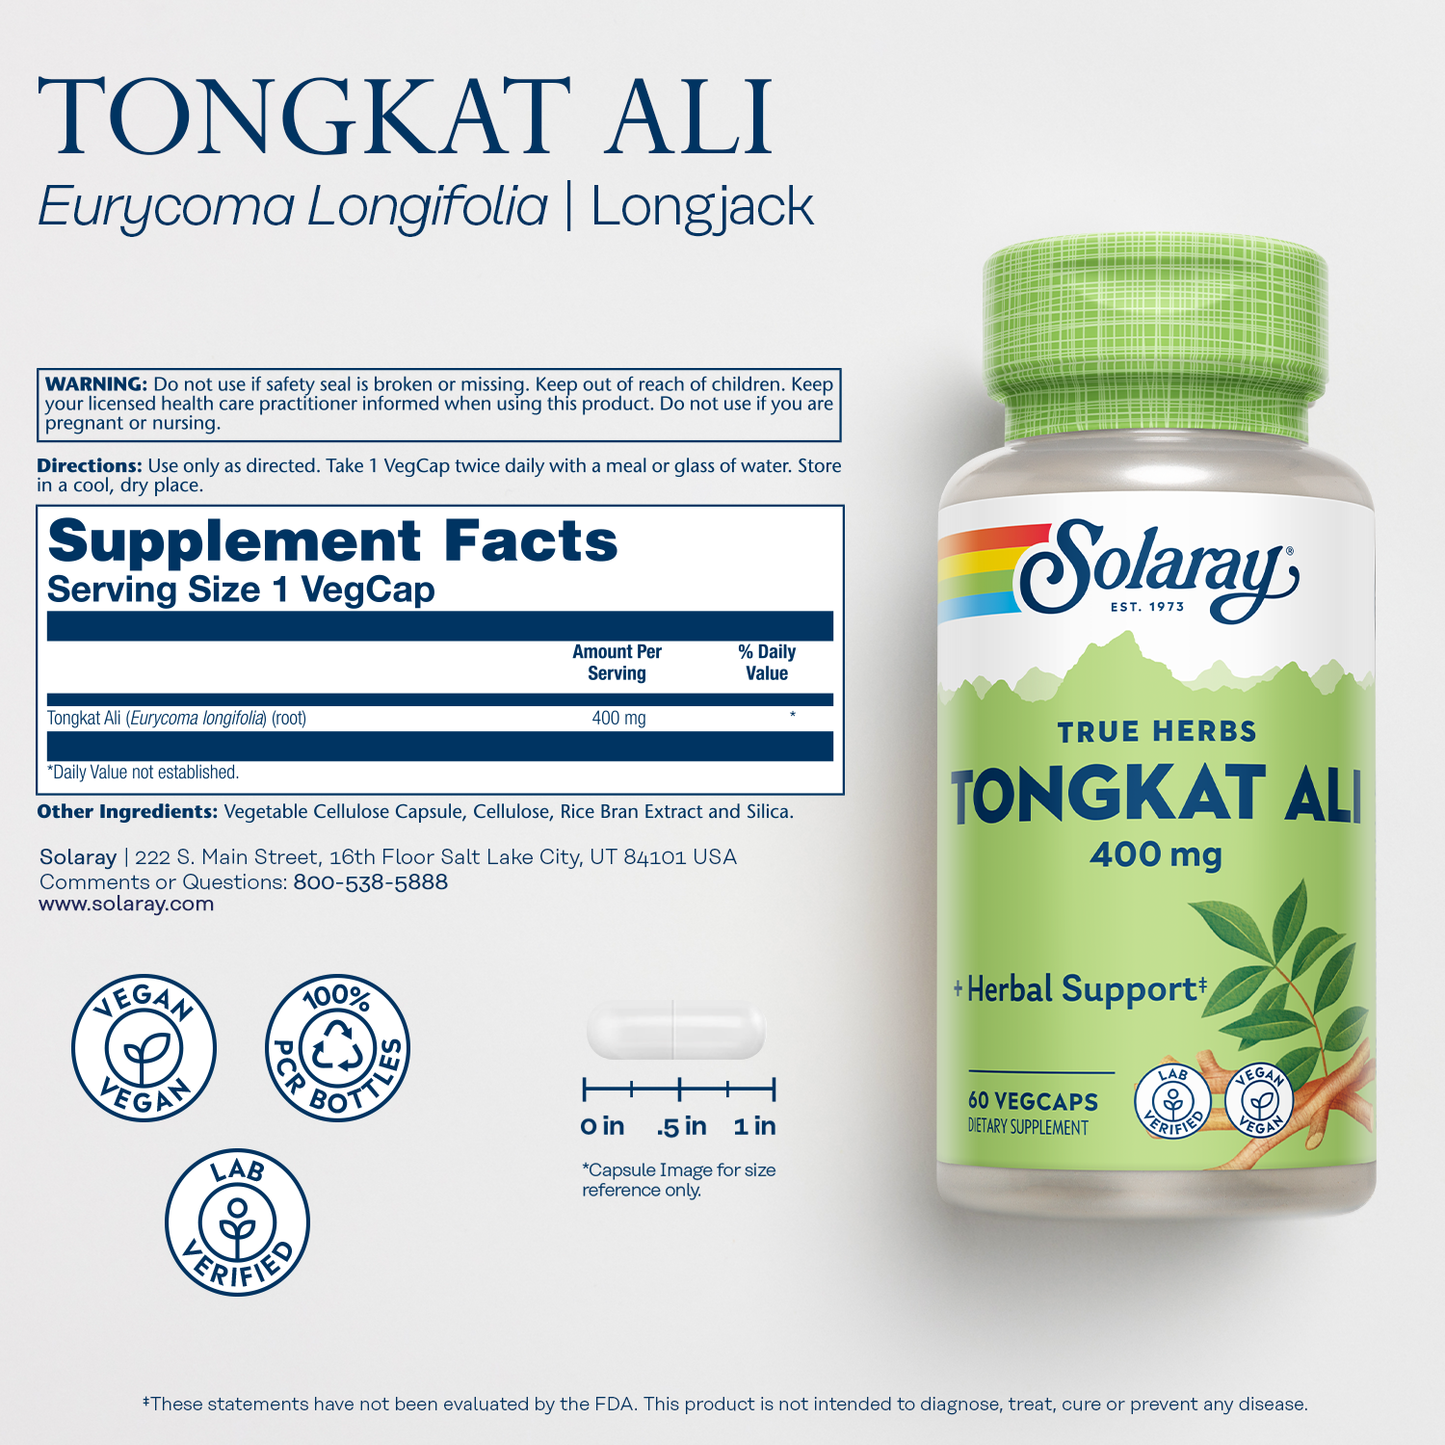 Solaray Tongkat Ali 400 mg, Longjack Tongkat Ali Supplement for Men, Increase Performance, Support Lean Muscle Growth, Natural Energy, Stamina & Recovery, 60 Capsules